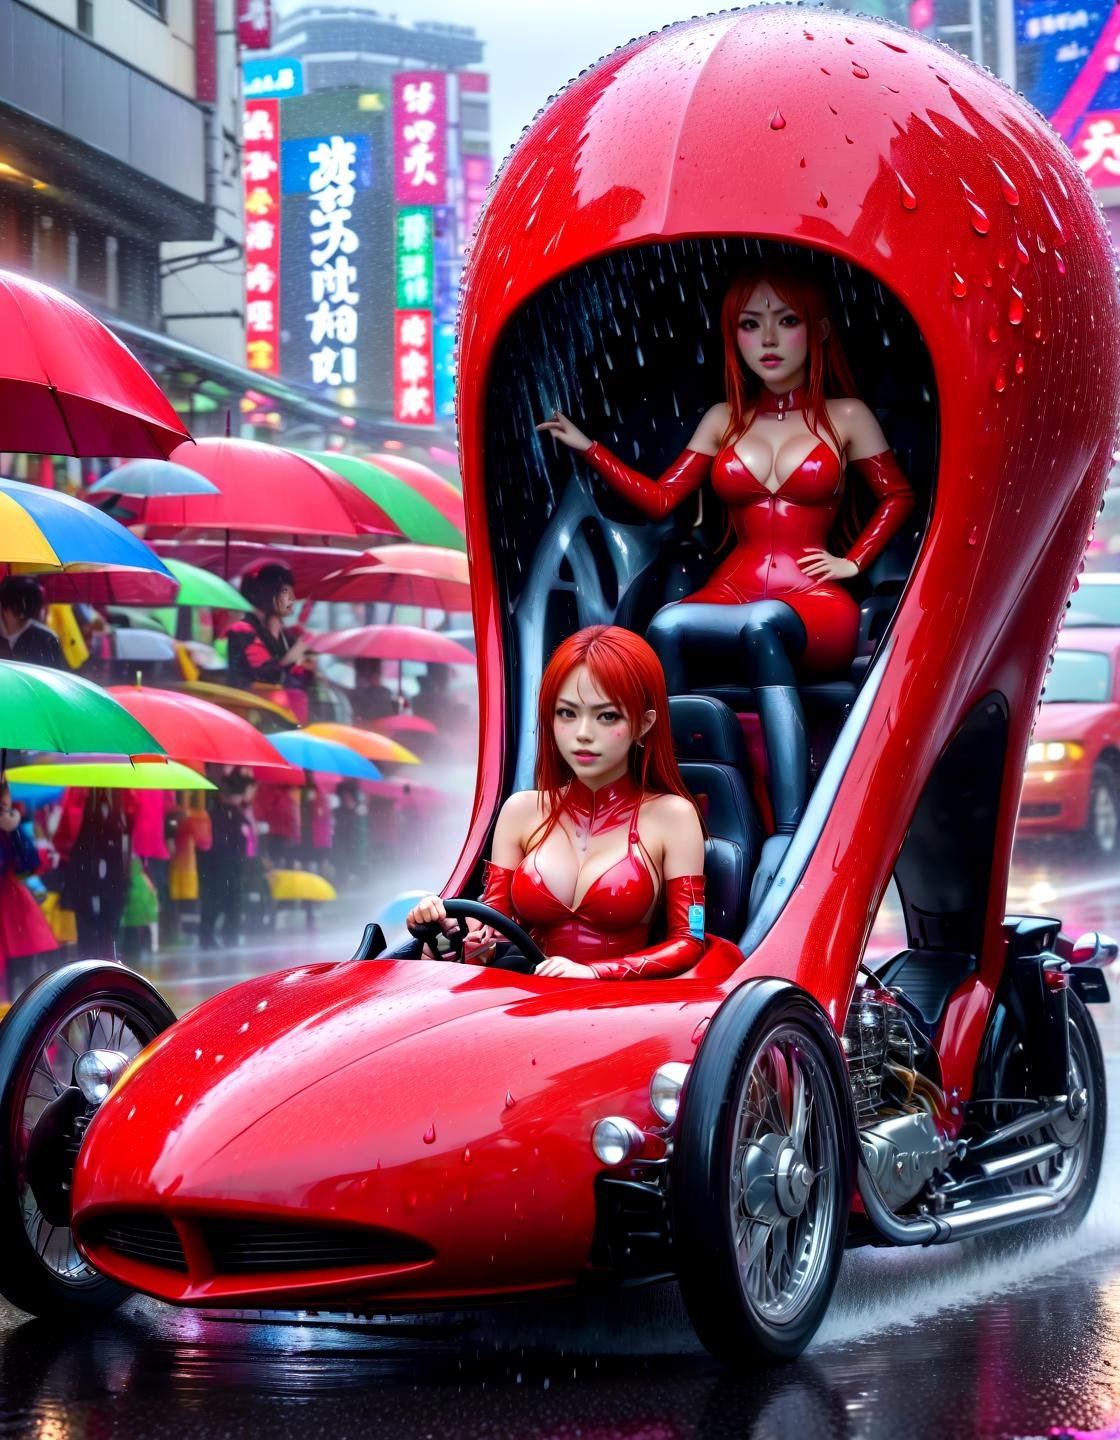 Ankama vivid animation style Erza Scarlet and Asuna driving together a black hhc,car, in tokio, masterpice, 8k, fog, glitterbomb,boobs, latex catsuit,red rainjacket, rain, waterdrops, thunderstorm,,. Vibrant colors, expansive storyworlds, stylized characters, flowing motion